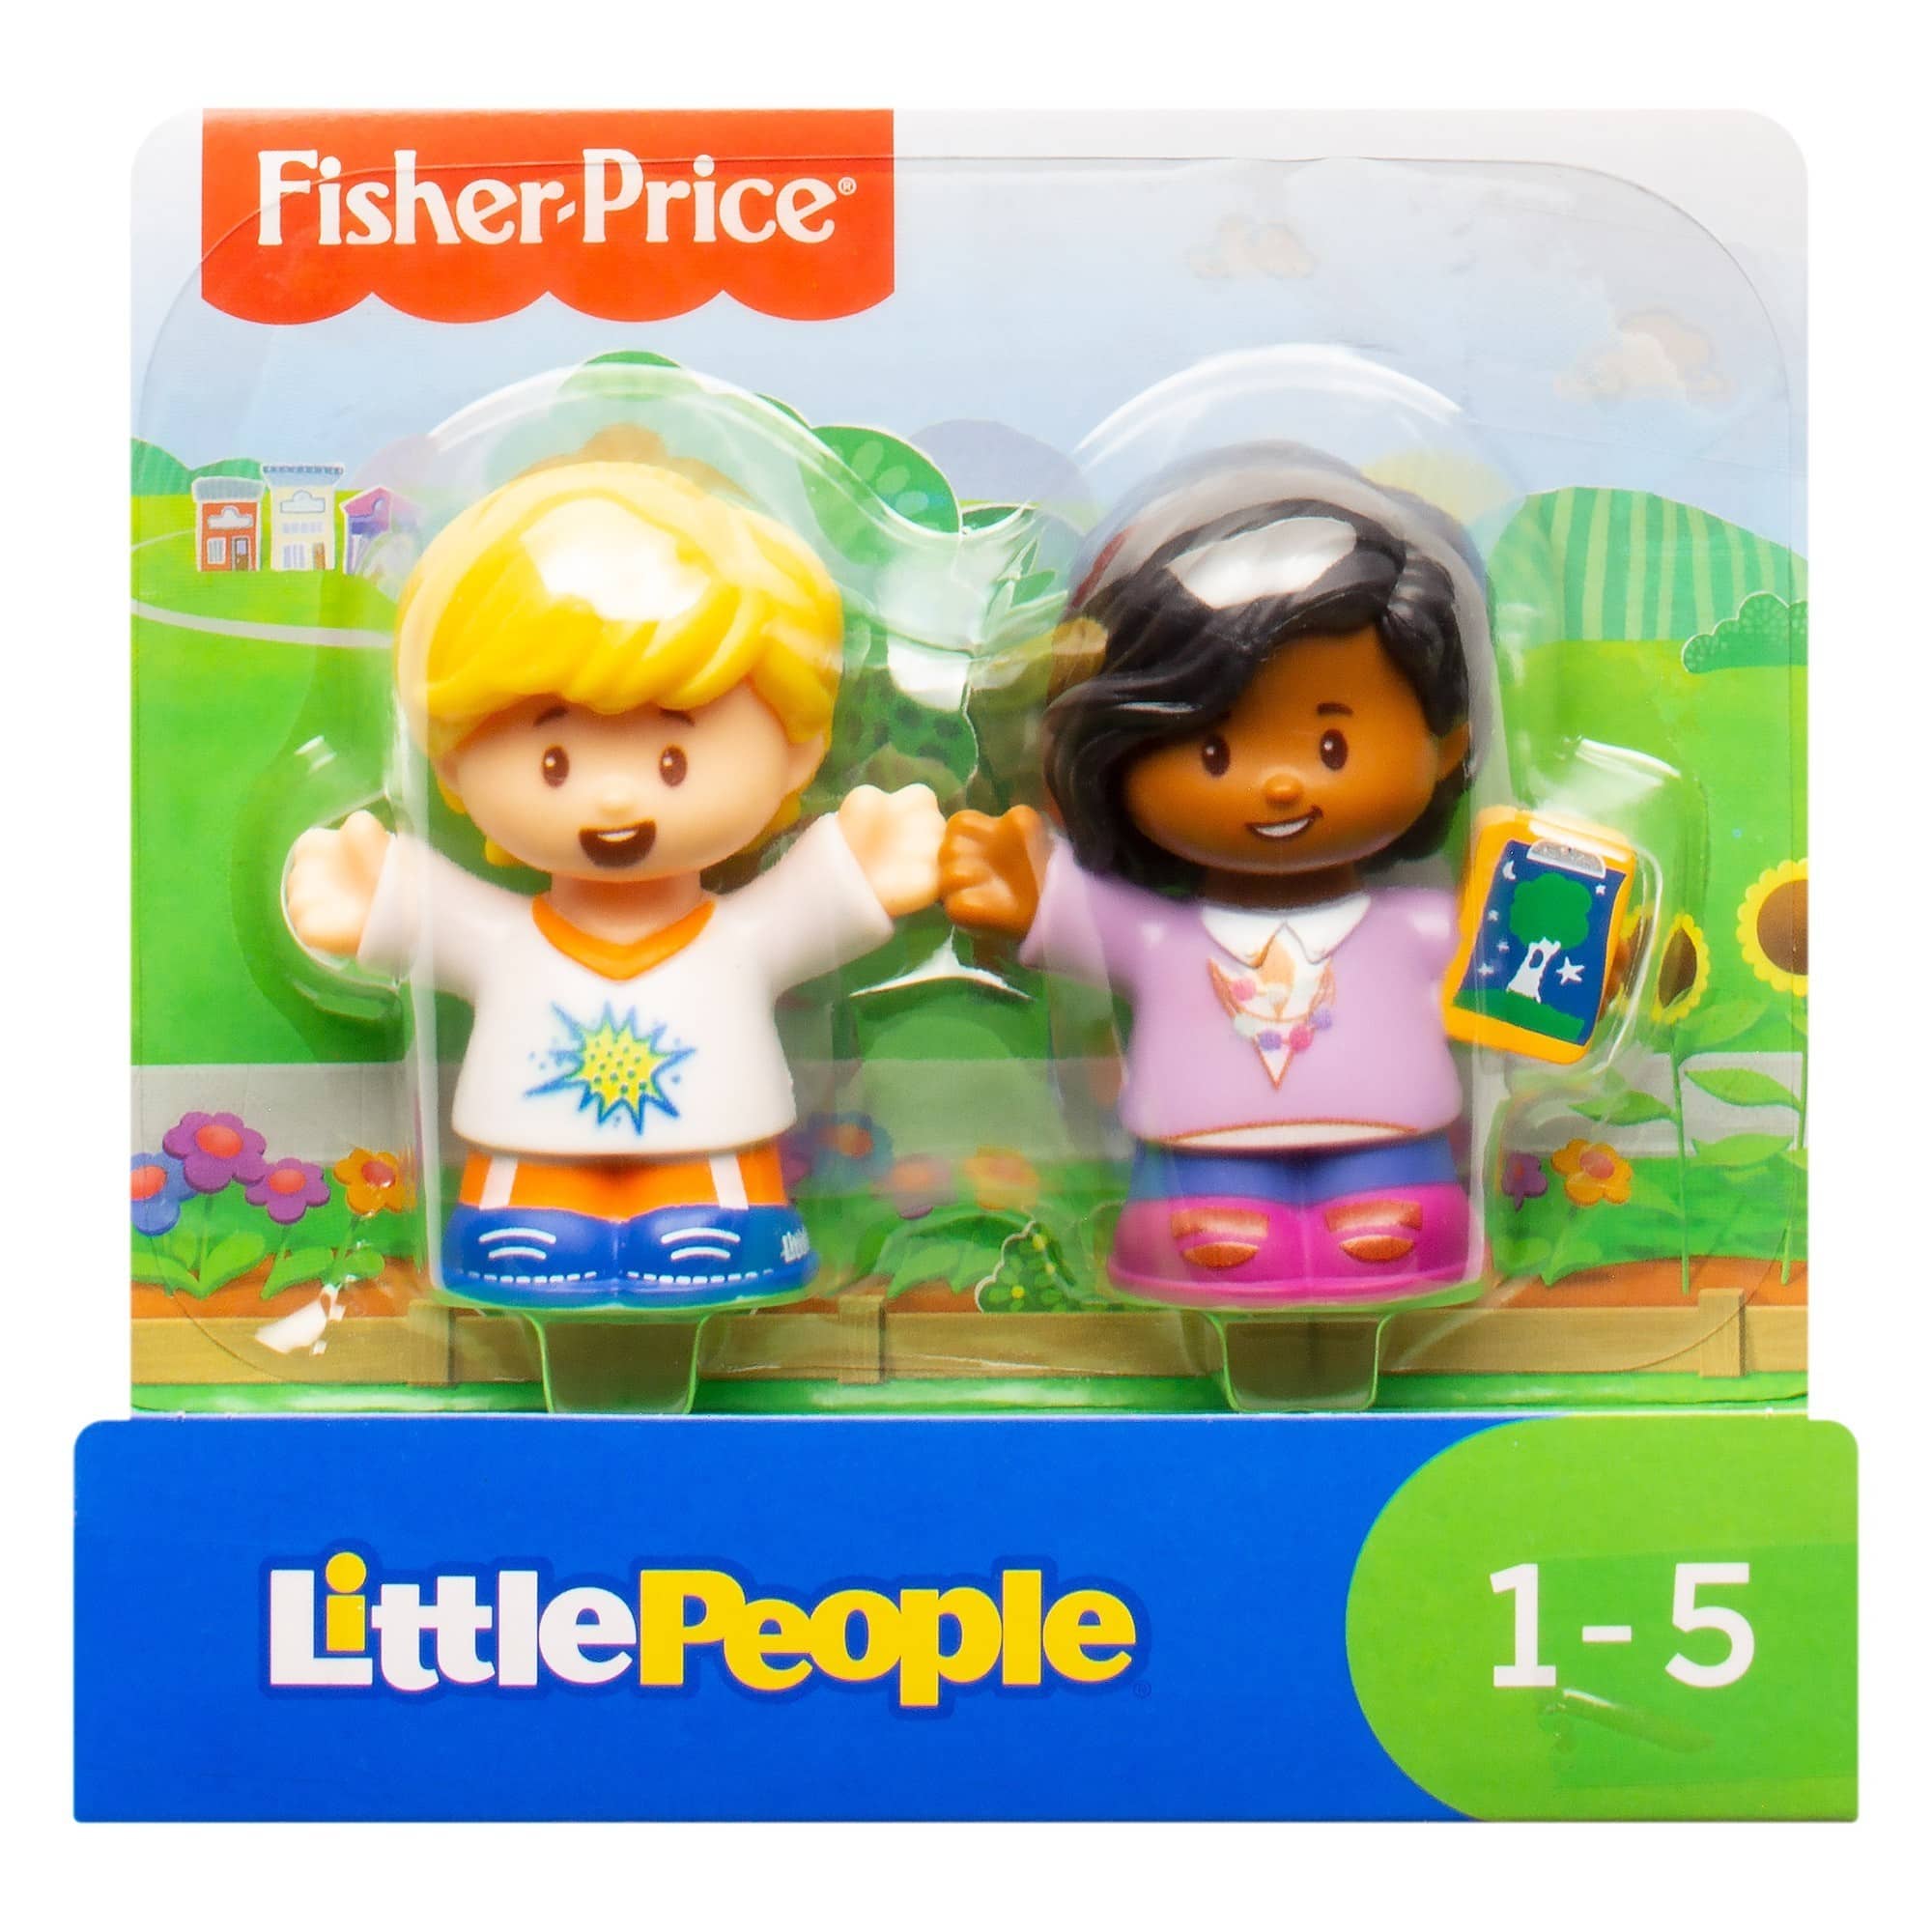 Fisher Price - Little People Figures - Eddie and Friend